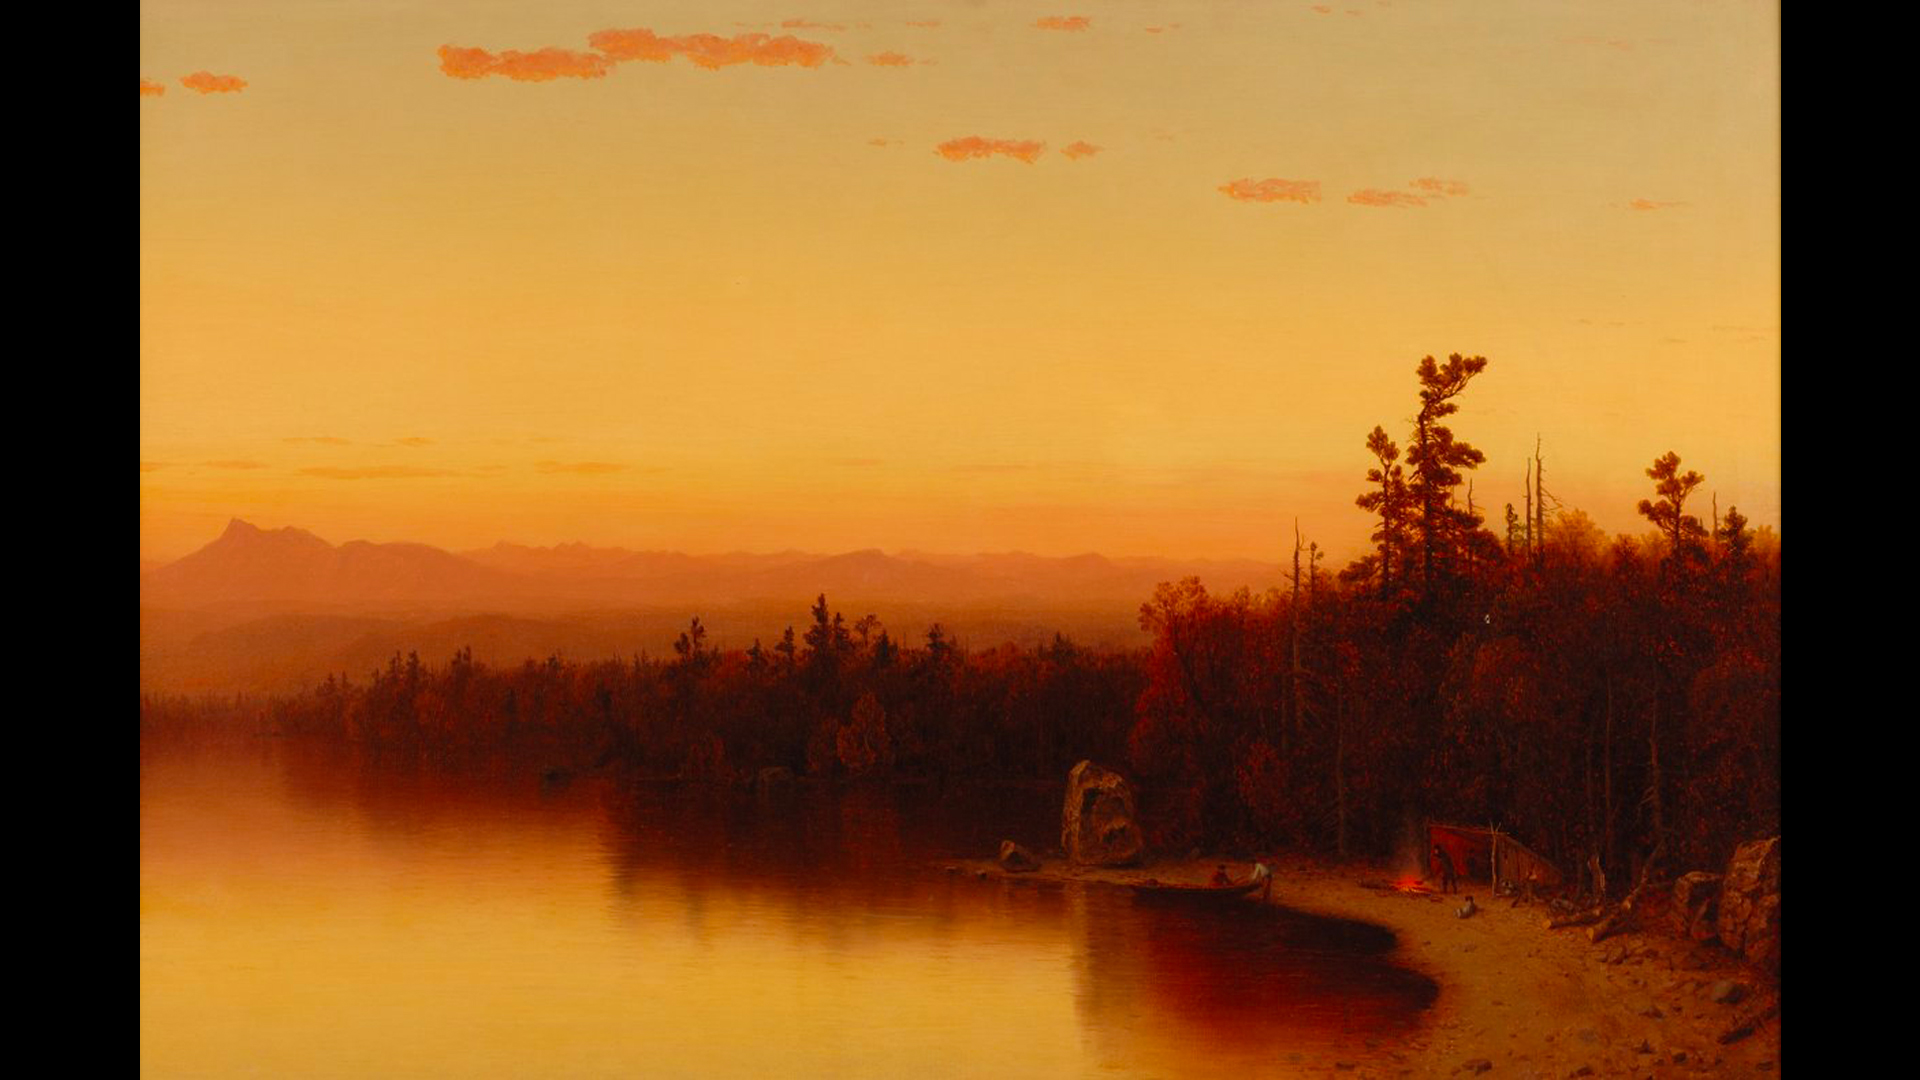 Twilight scene, lake entering from right foreground to left background reflects the sunset and brilliant sky which covers the upper half of the canvas.